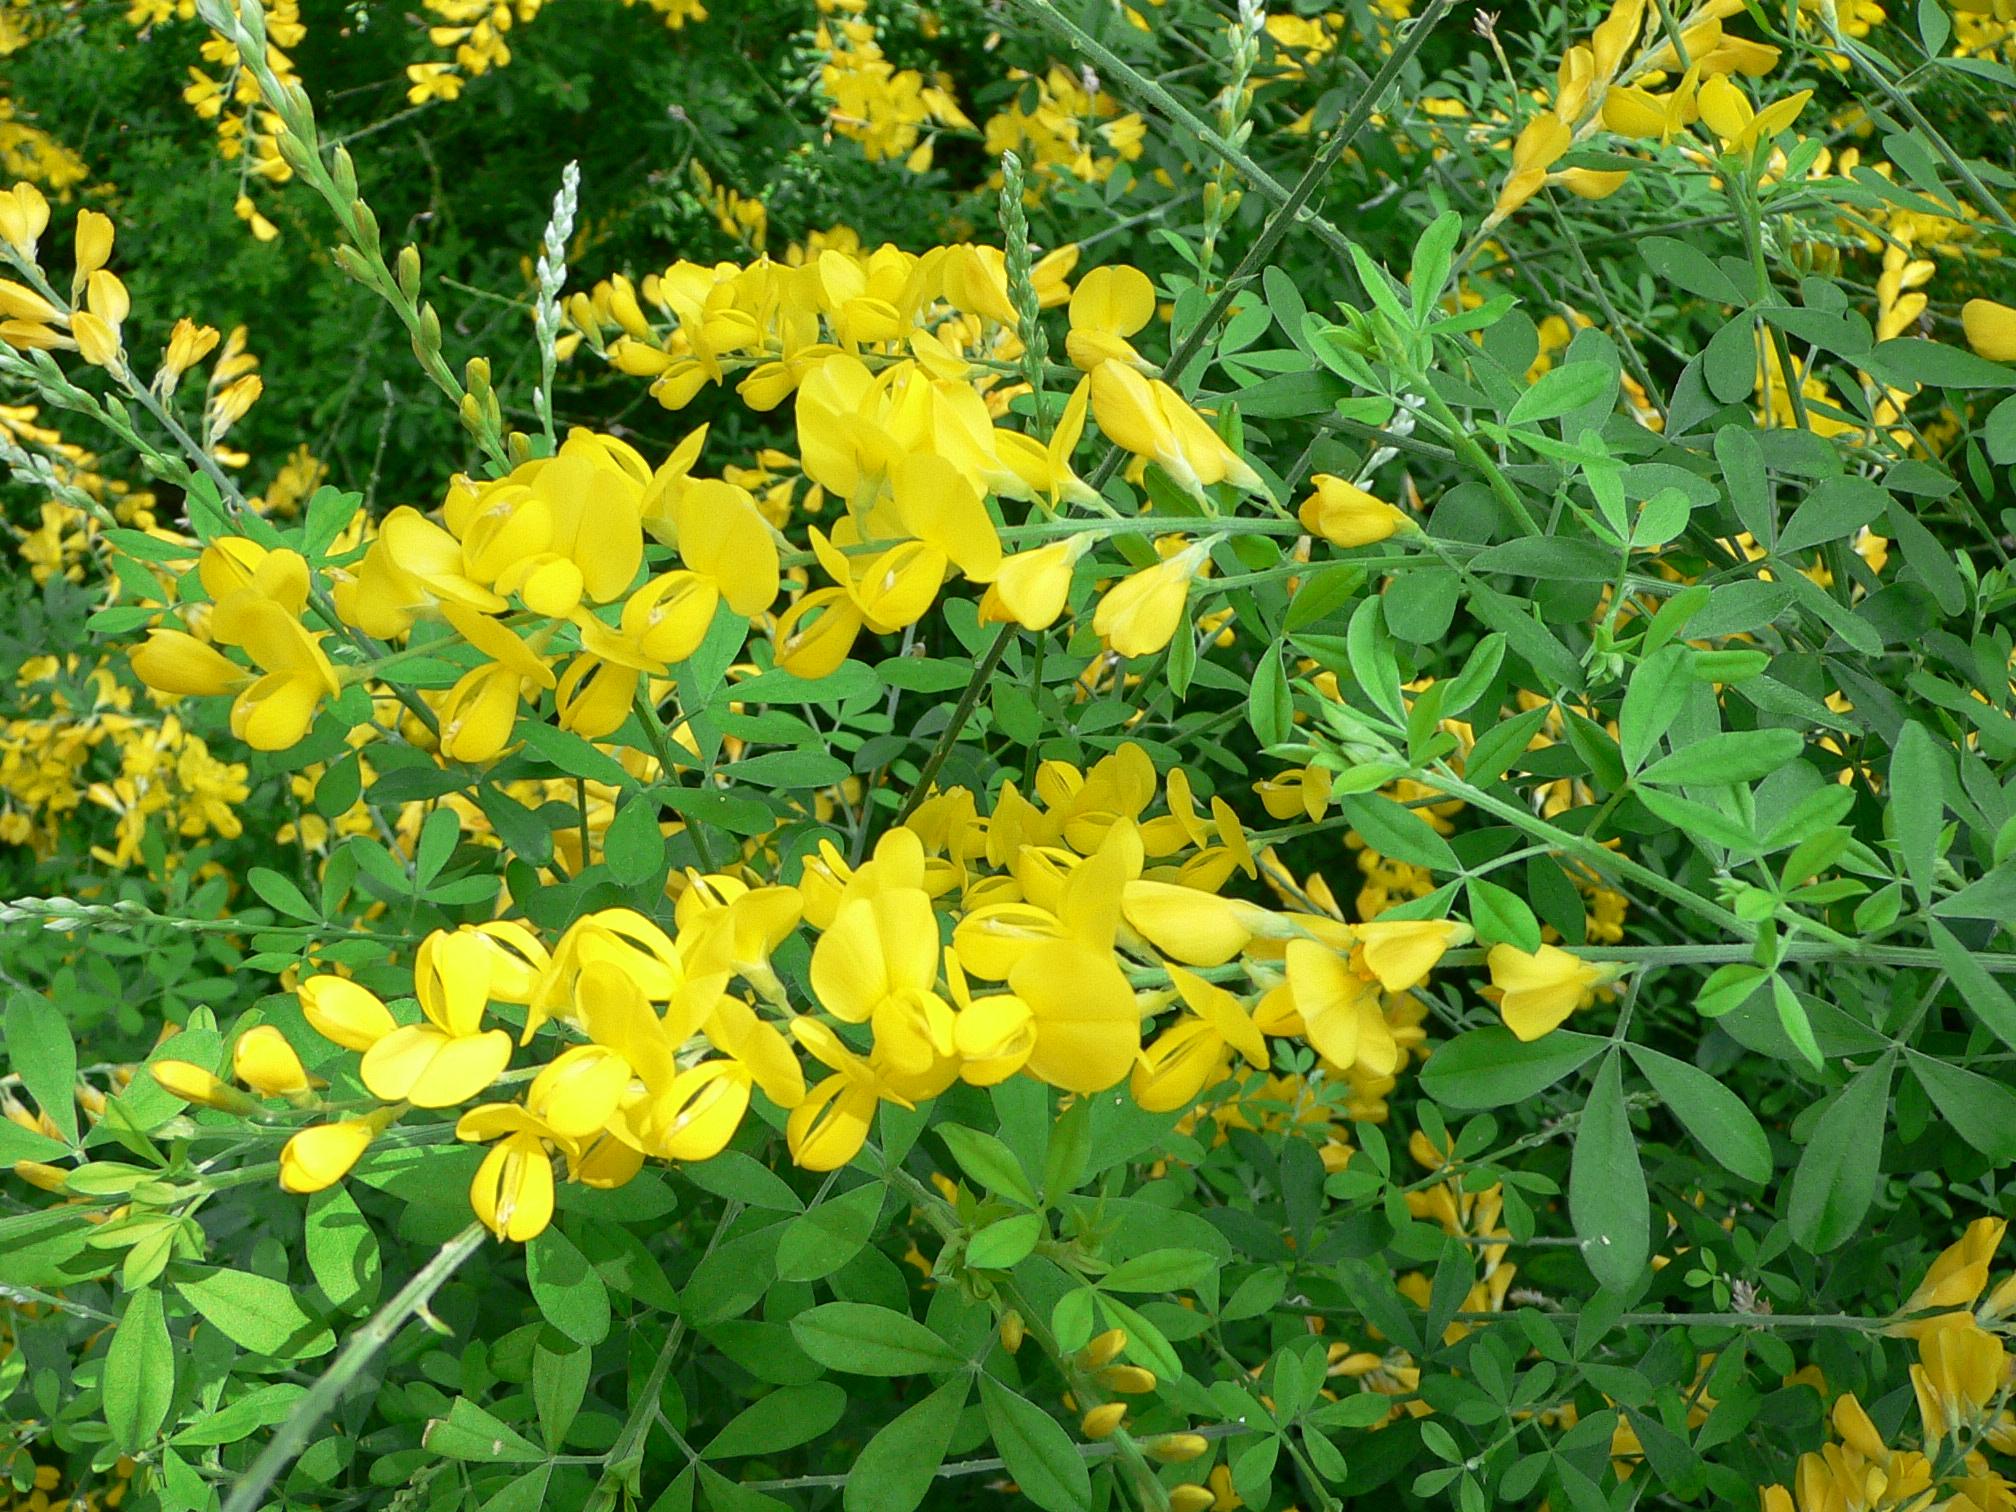 yellow flowers and buds with green leaves and stems